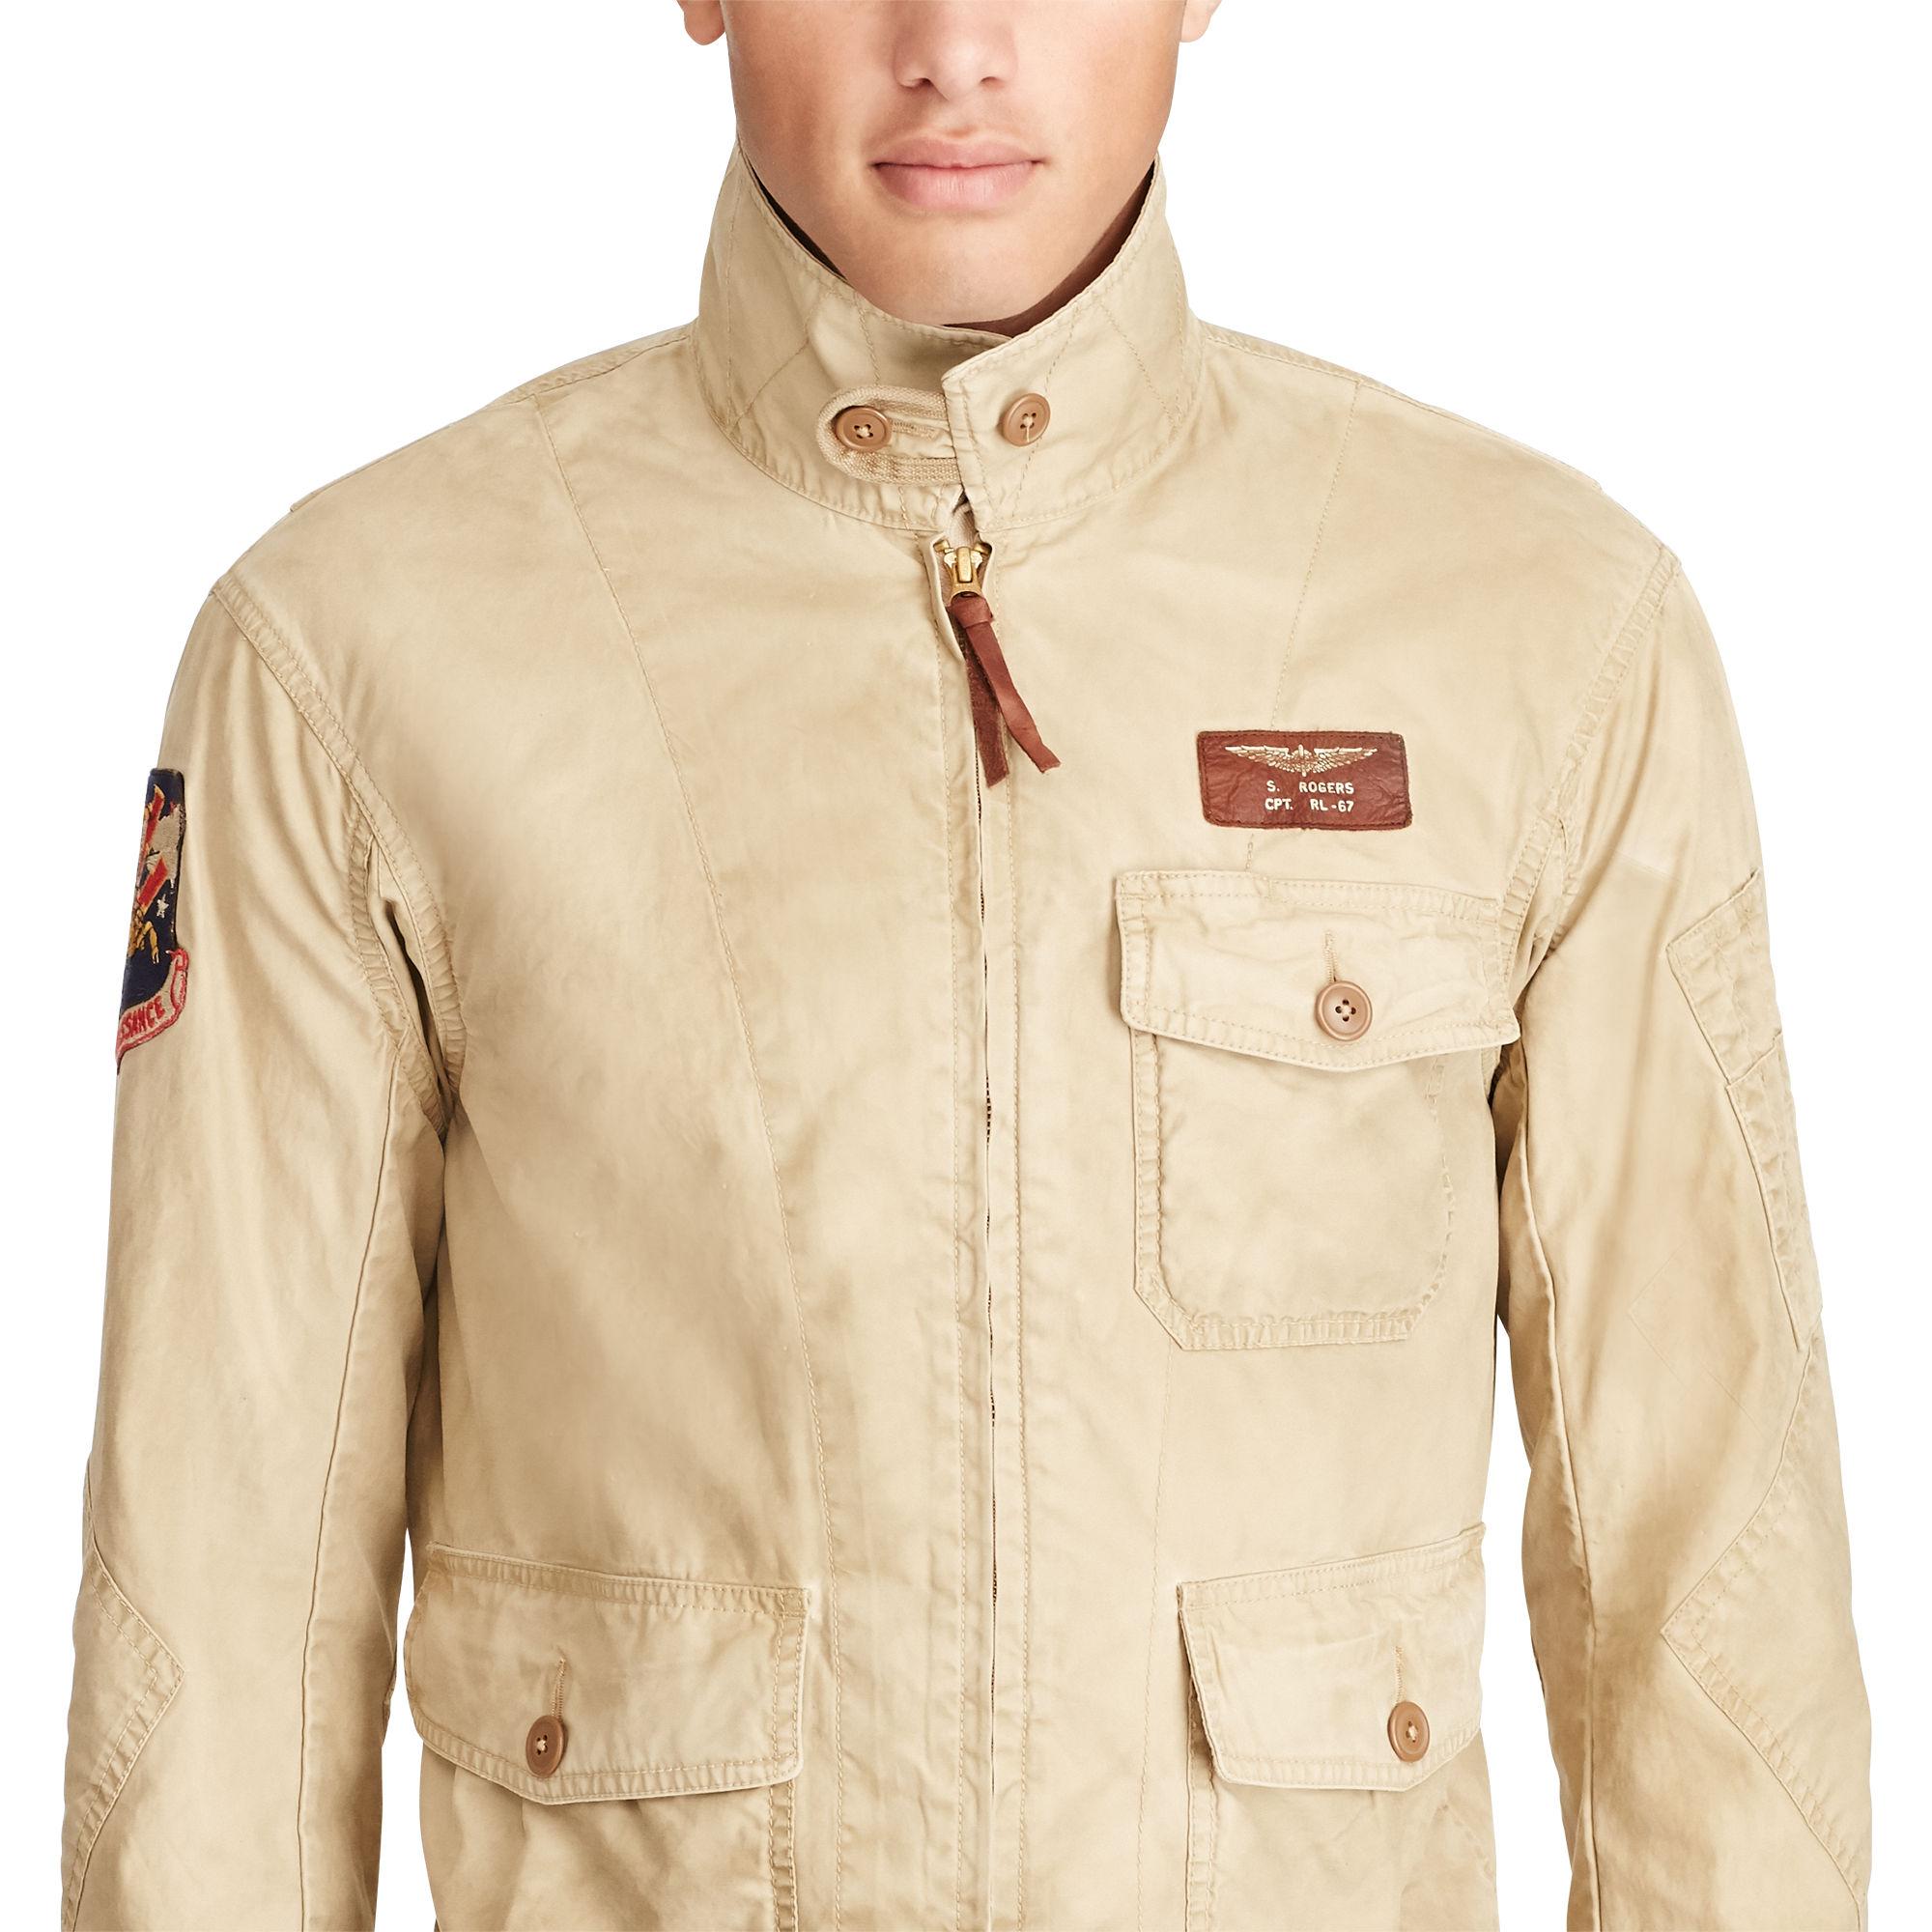 Lyst - Polo Ralph Lauren Cotton Twill Jacket in Natural 